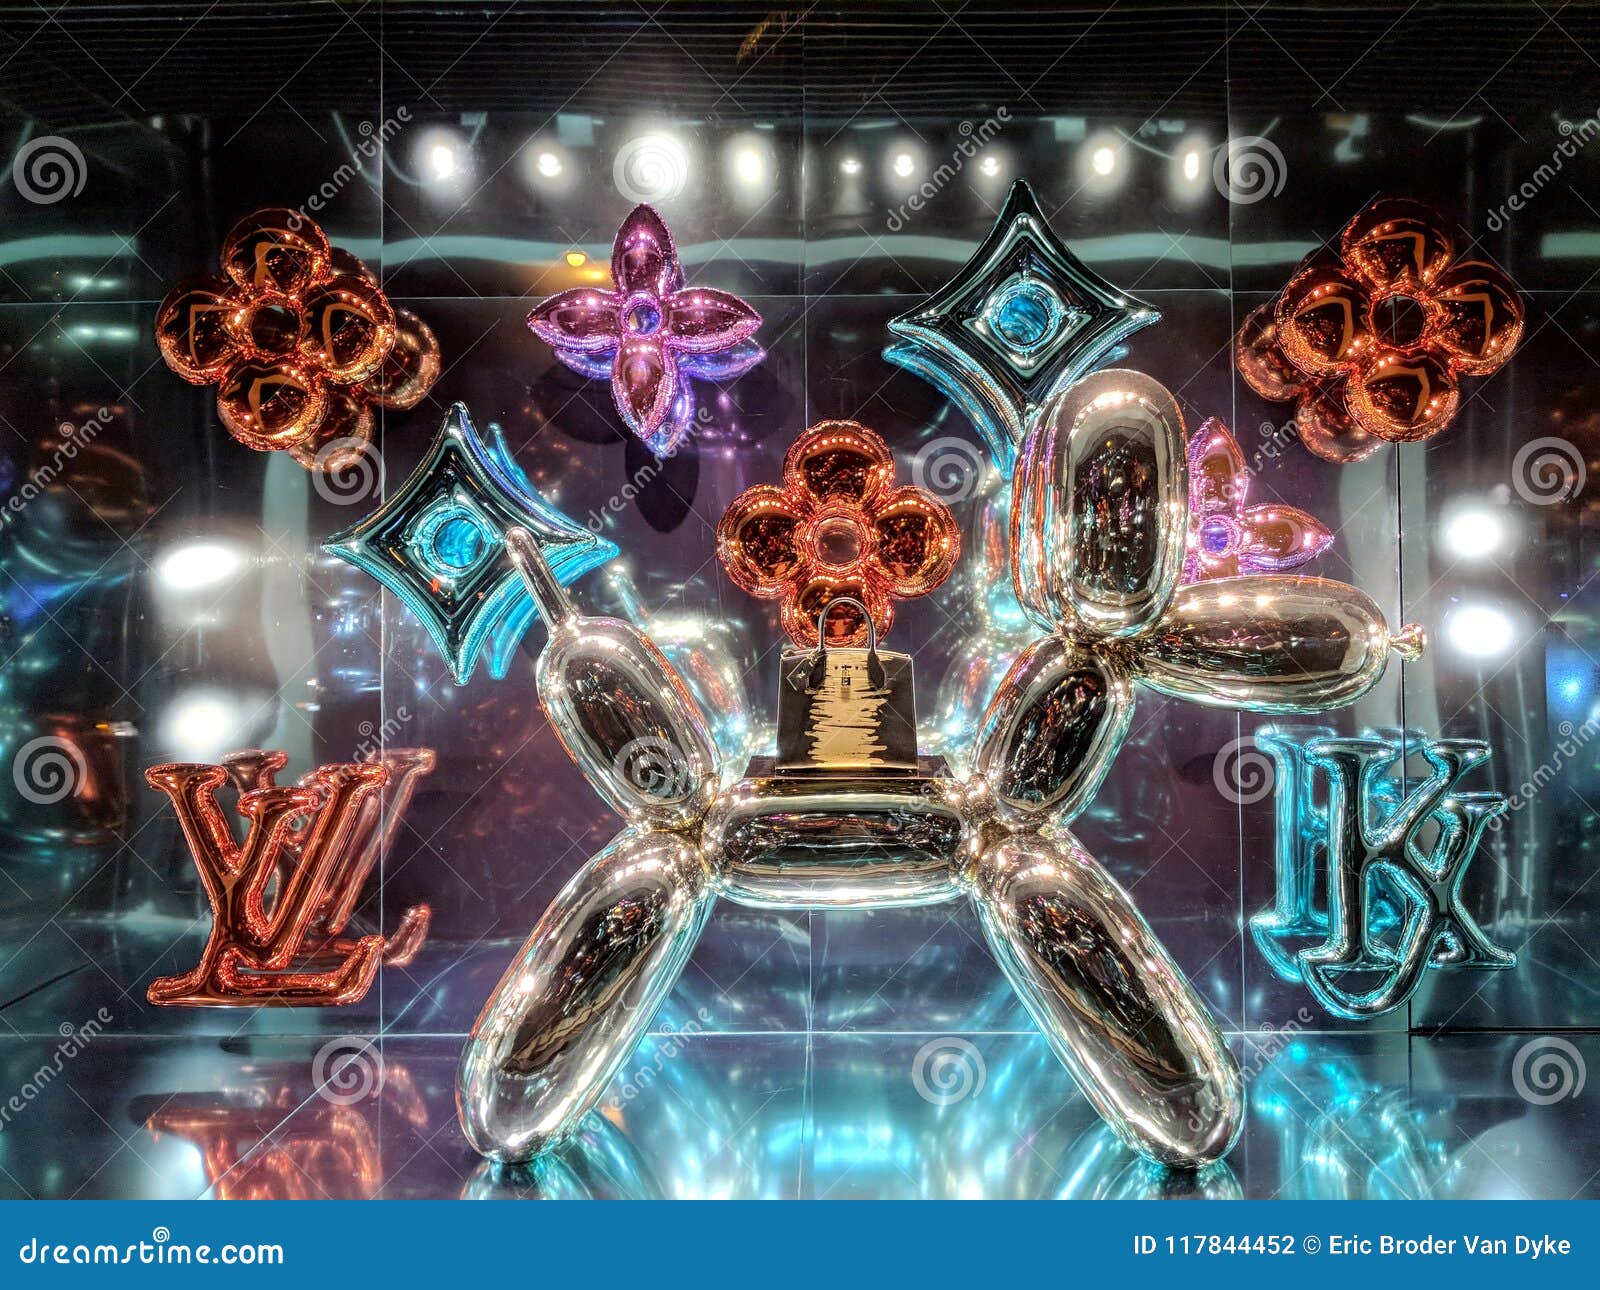 Louis Vuitton X Jeff Koons - the Masters Collection Display